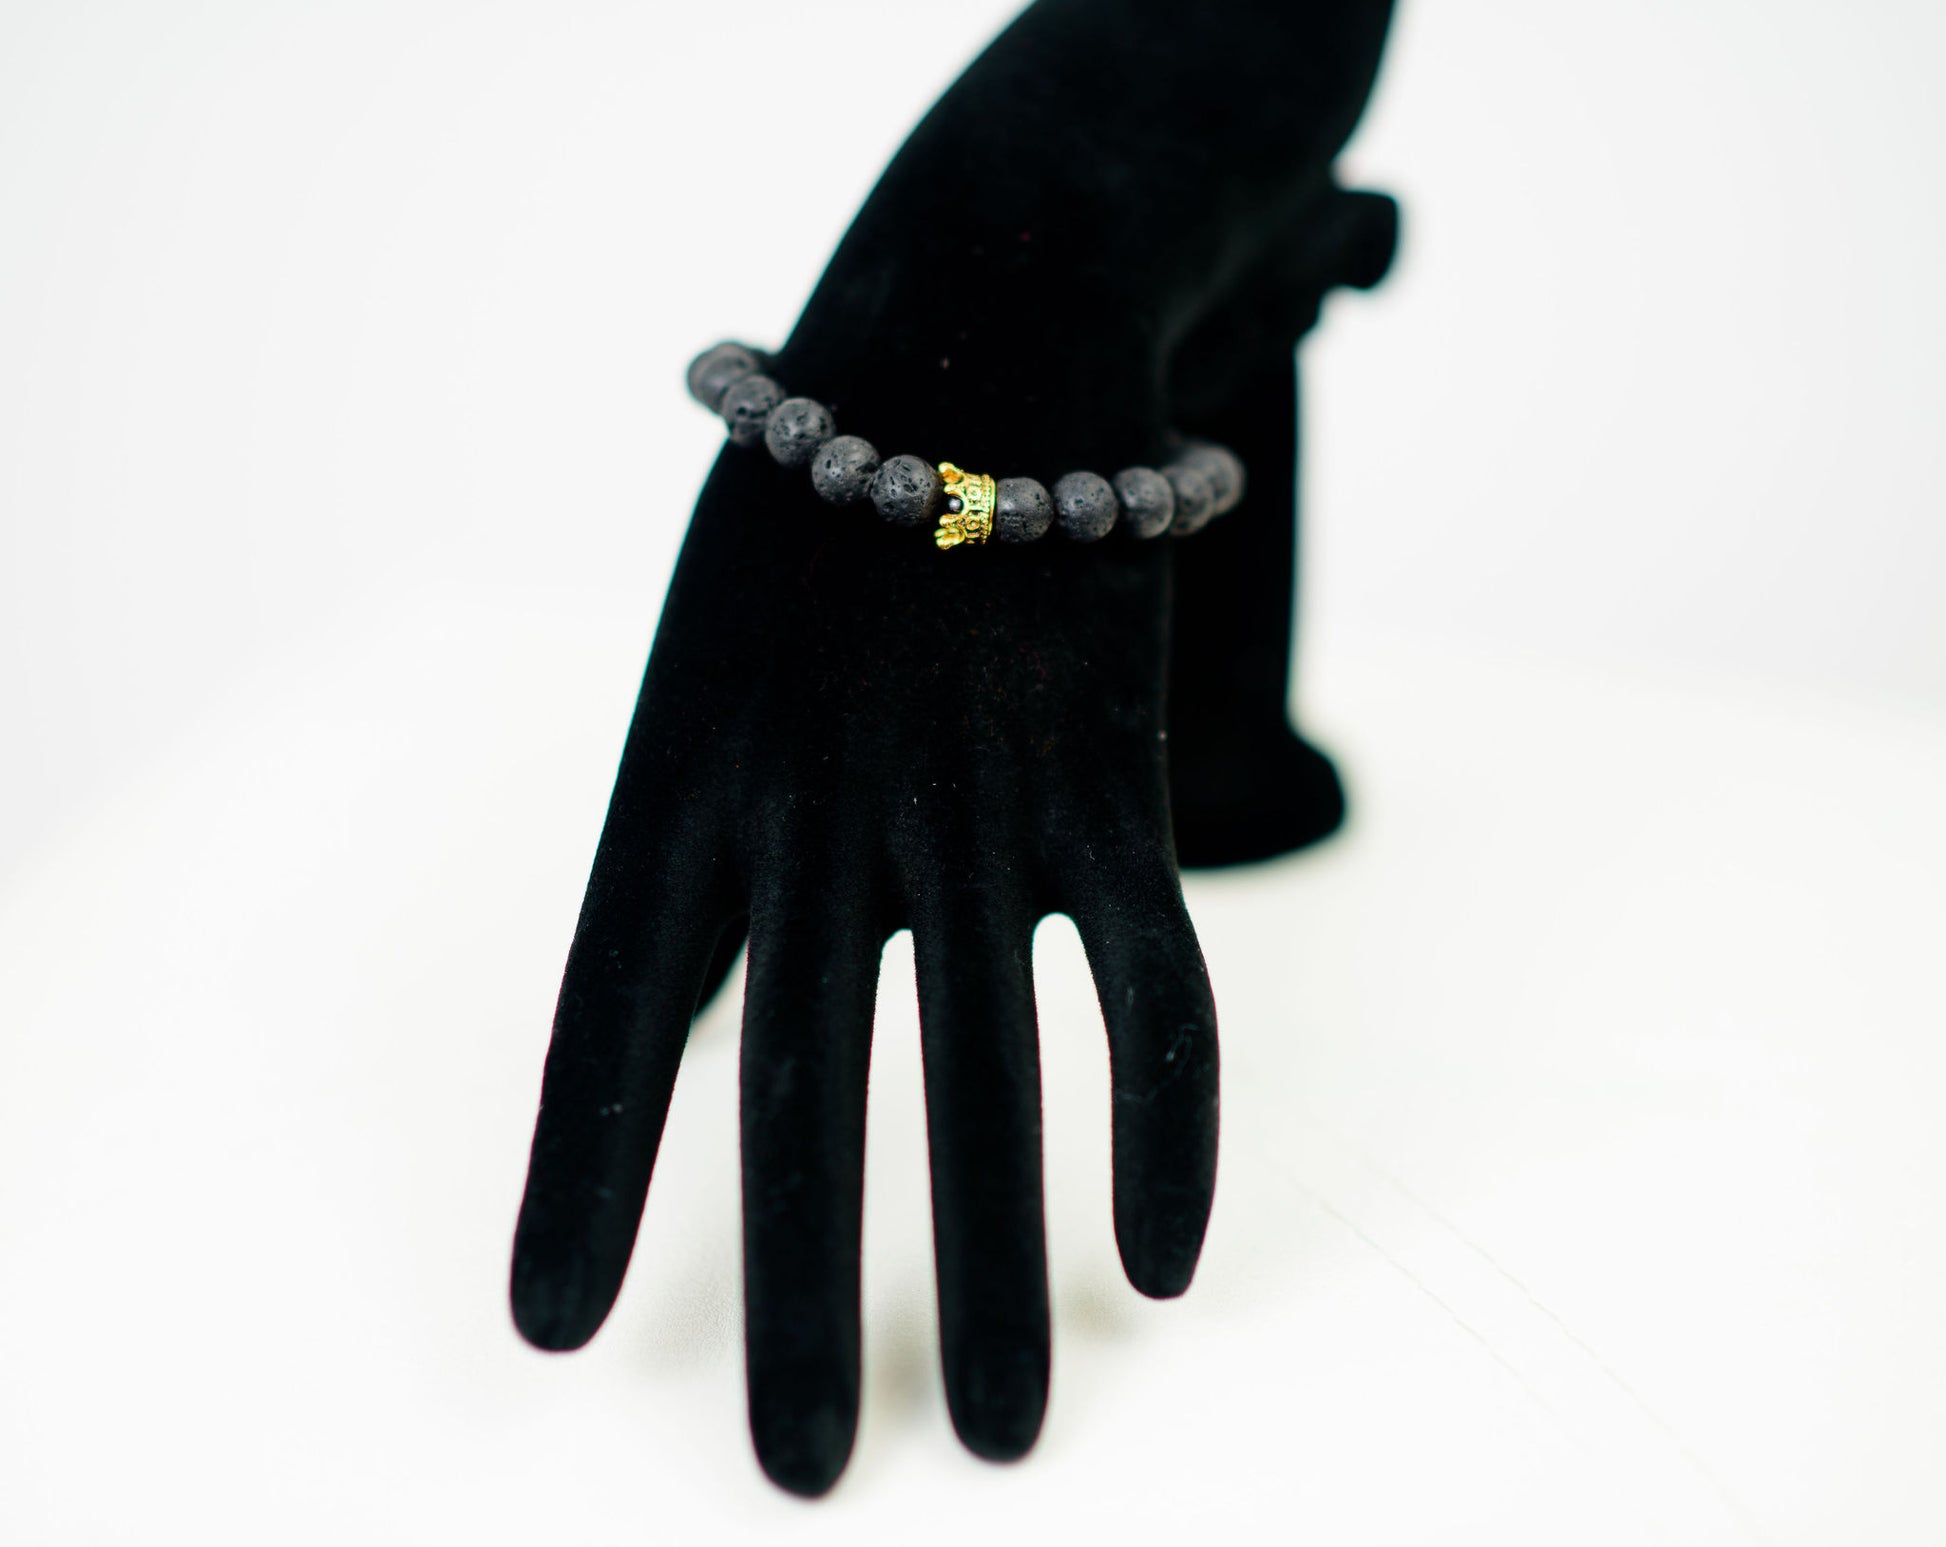 Nobility bracelet with lava stone with gold colored crown